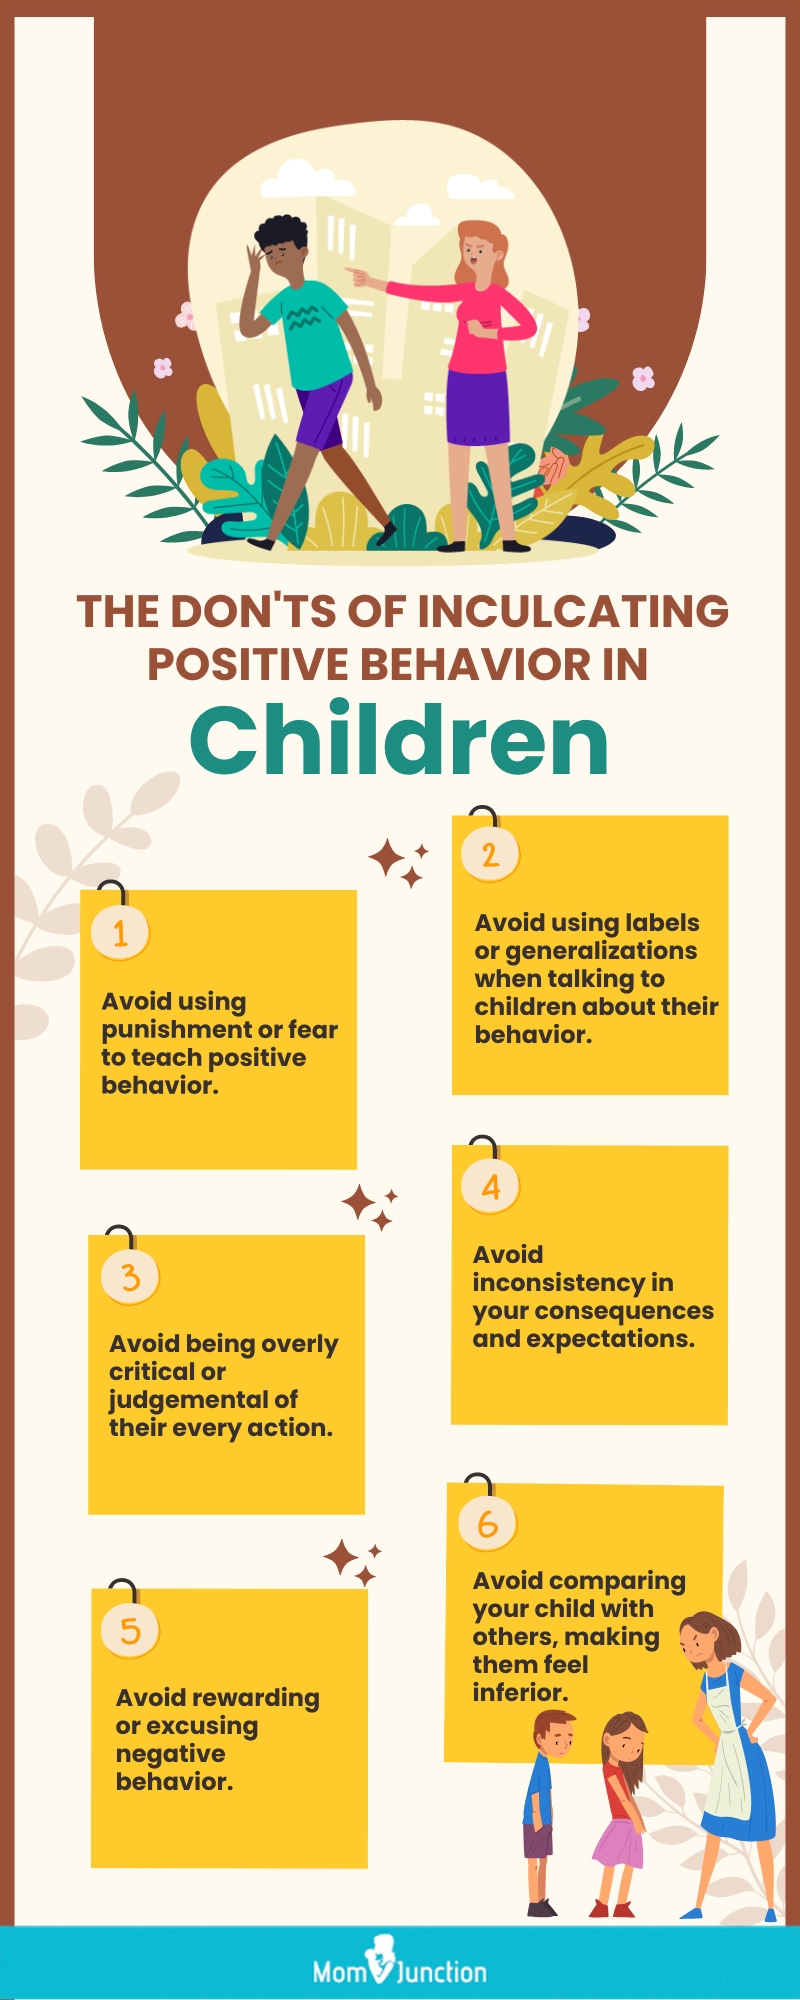 the donts of inculating positive behavior in children (infographic)